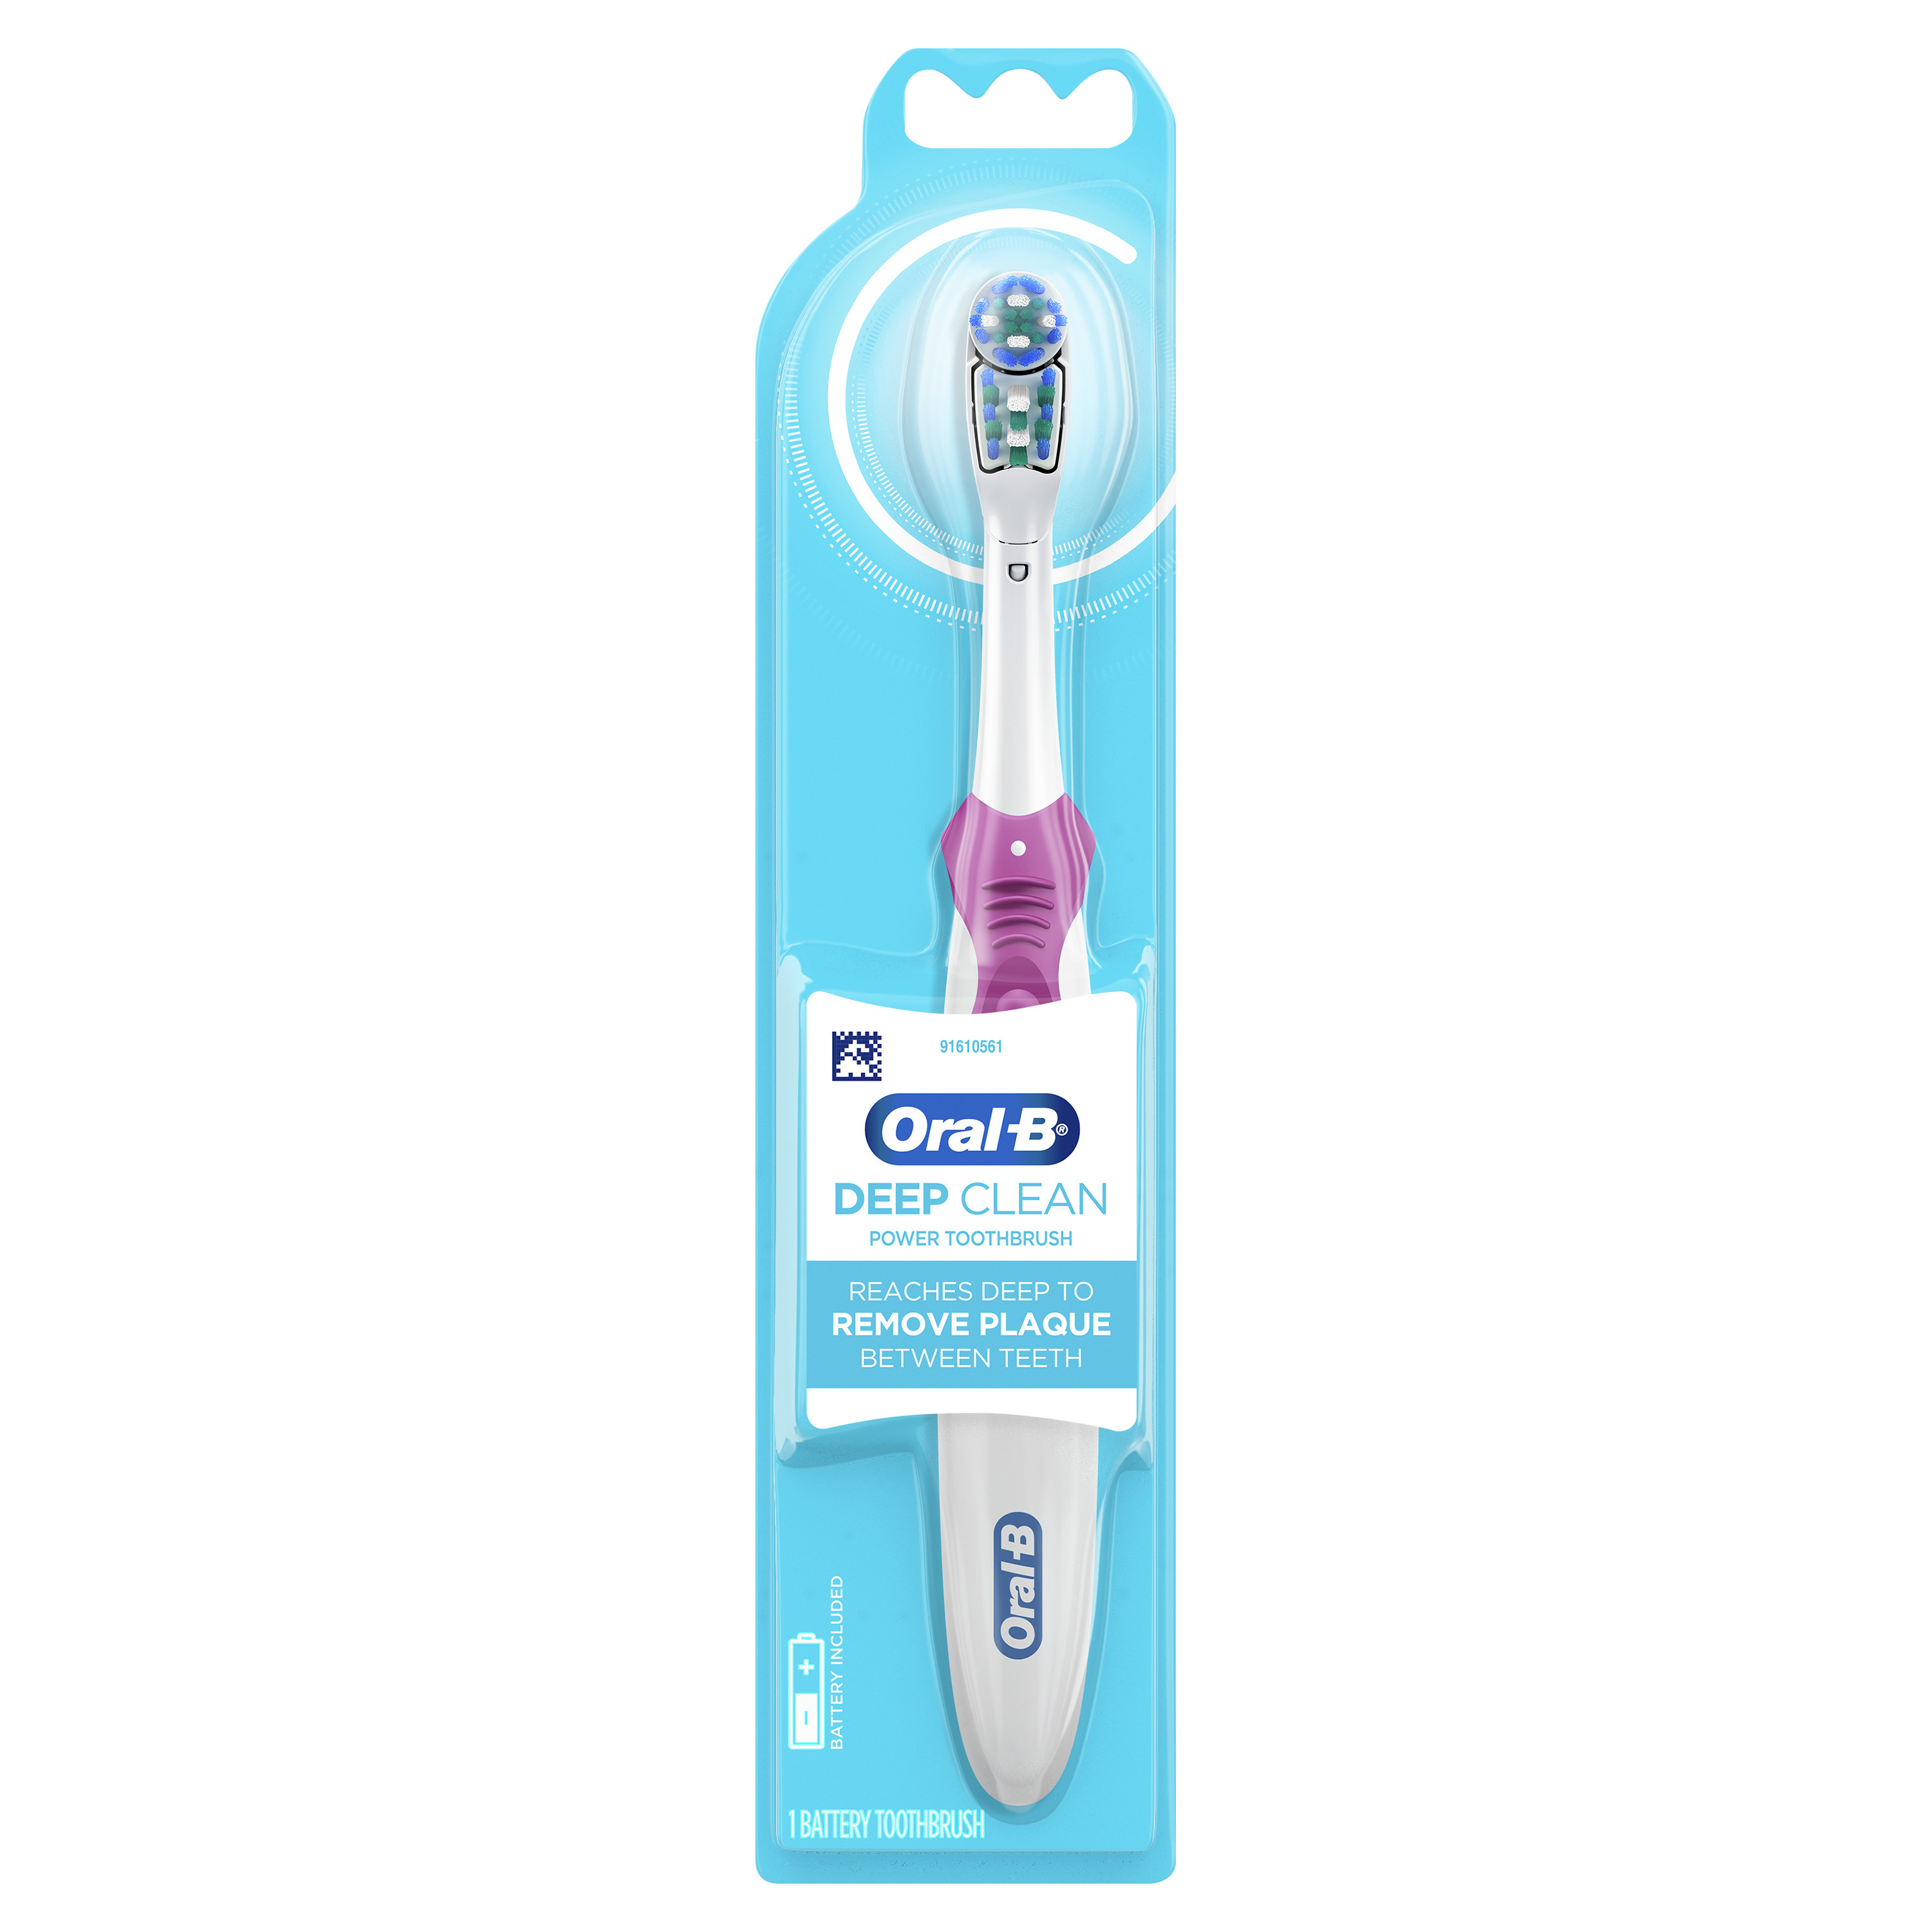 Oral-B Complete Battery Powered Toothbrush, 1 Count, Full Head, for Adults and Children 3+ - image 1 of 9